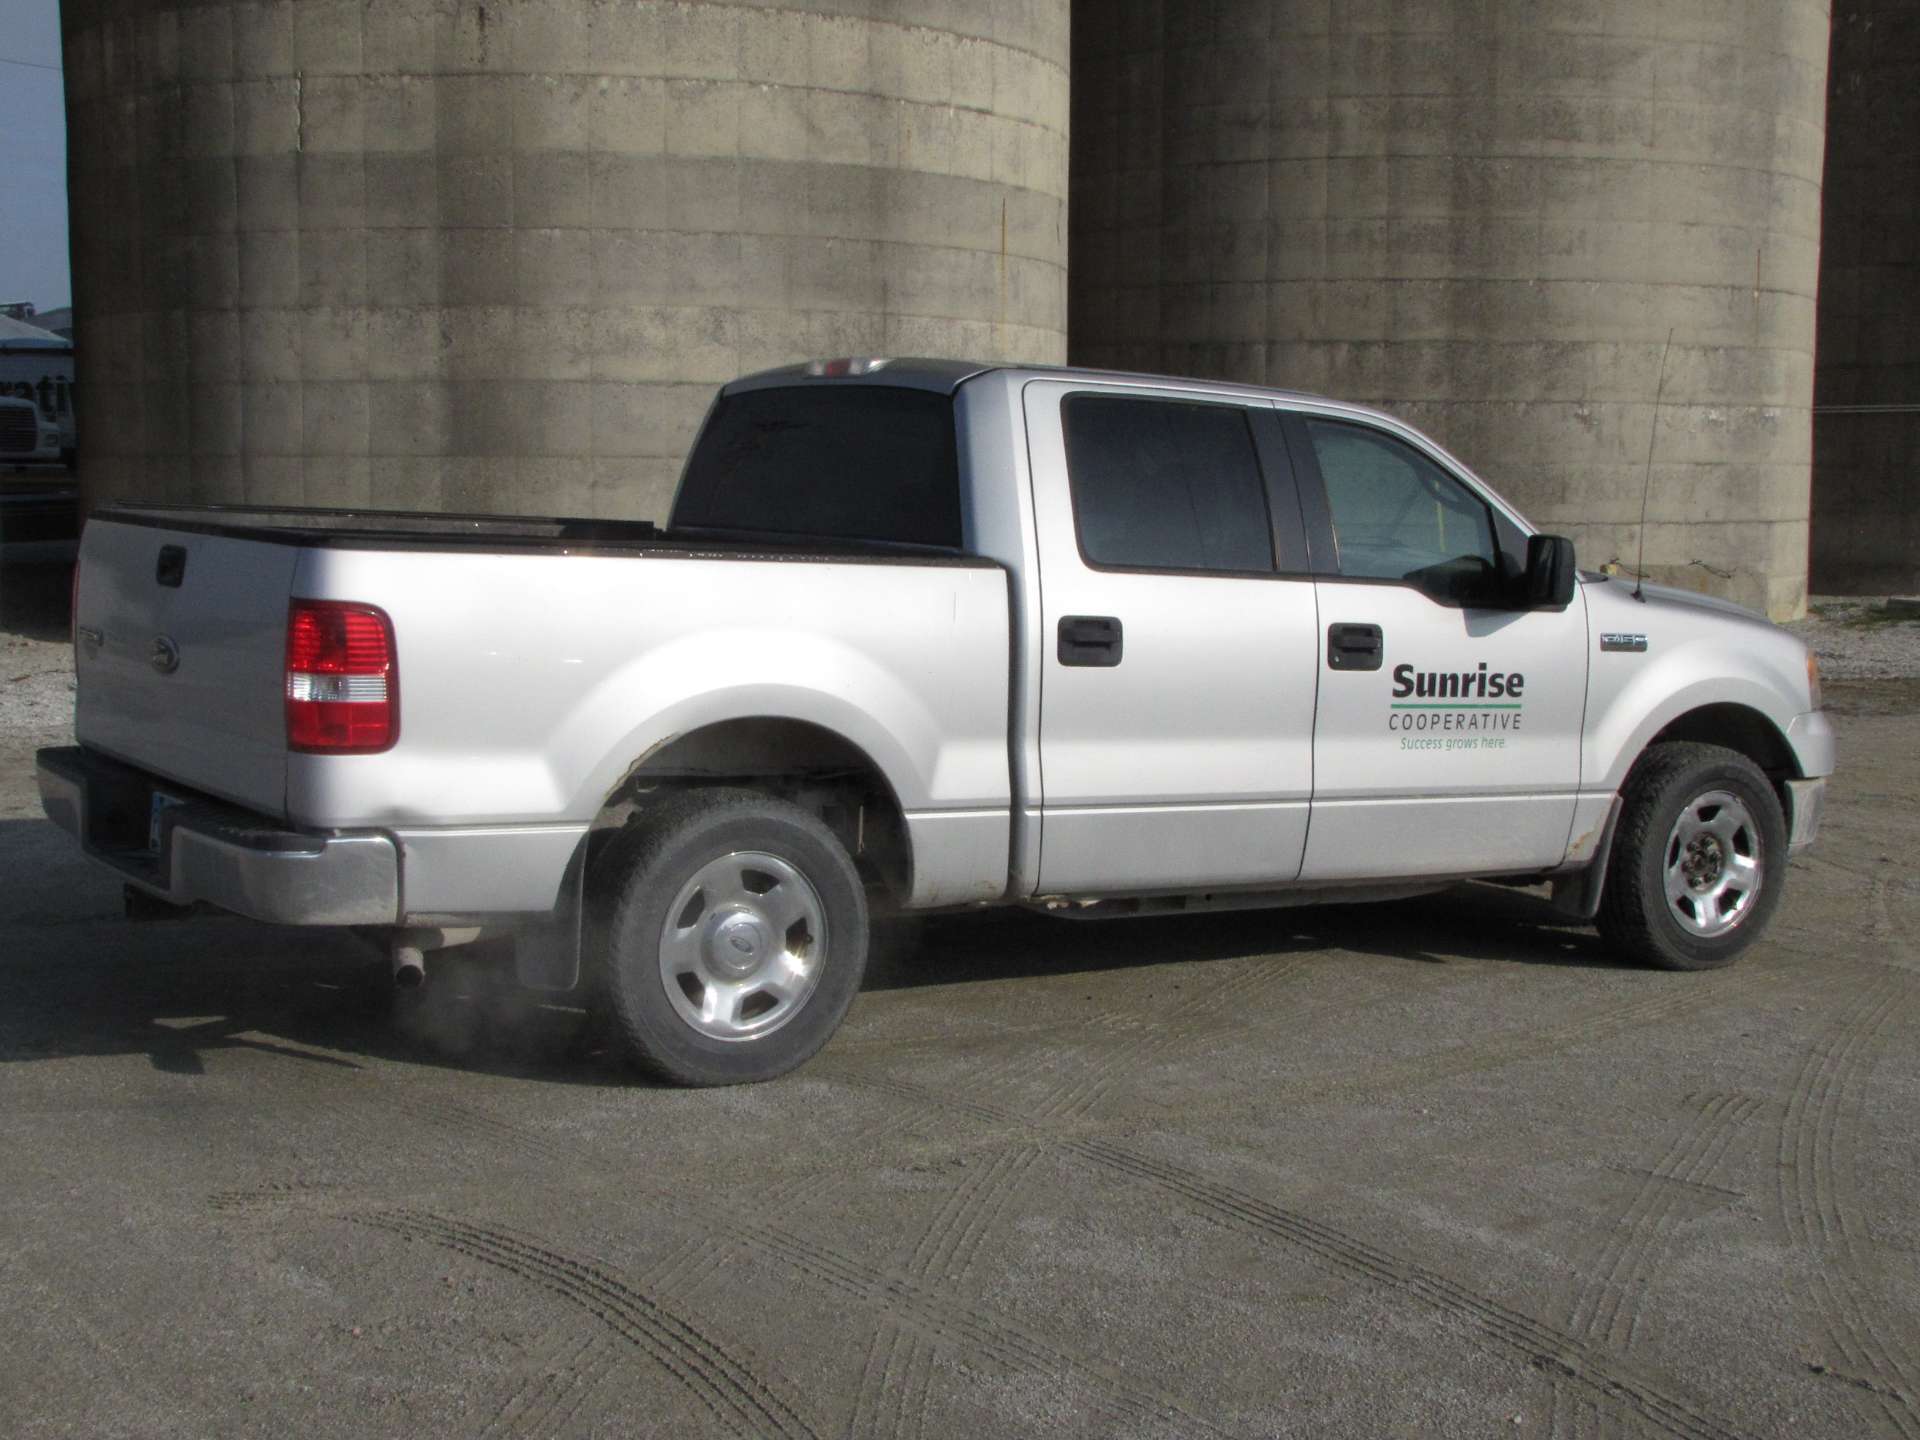 2005 Ford F-150 XLT pickup truck - Image 21 of 89